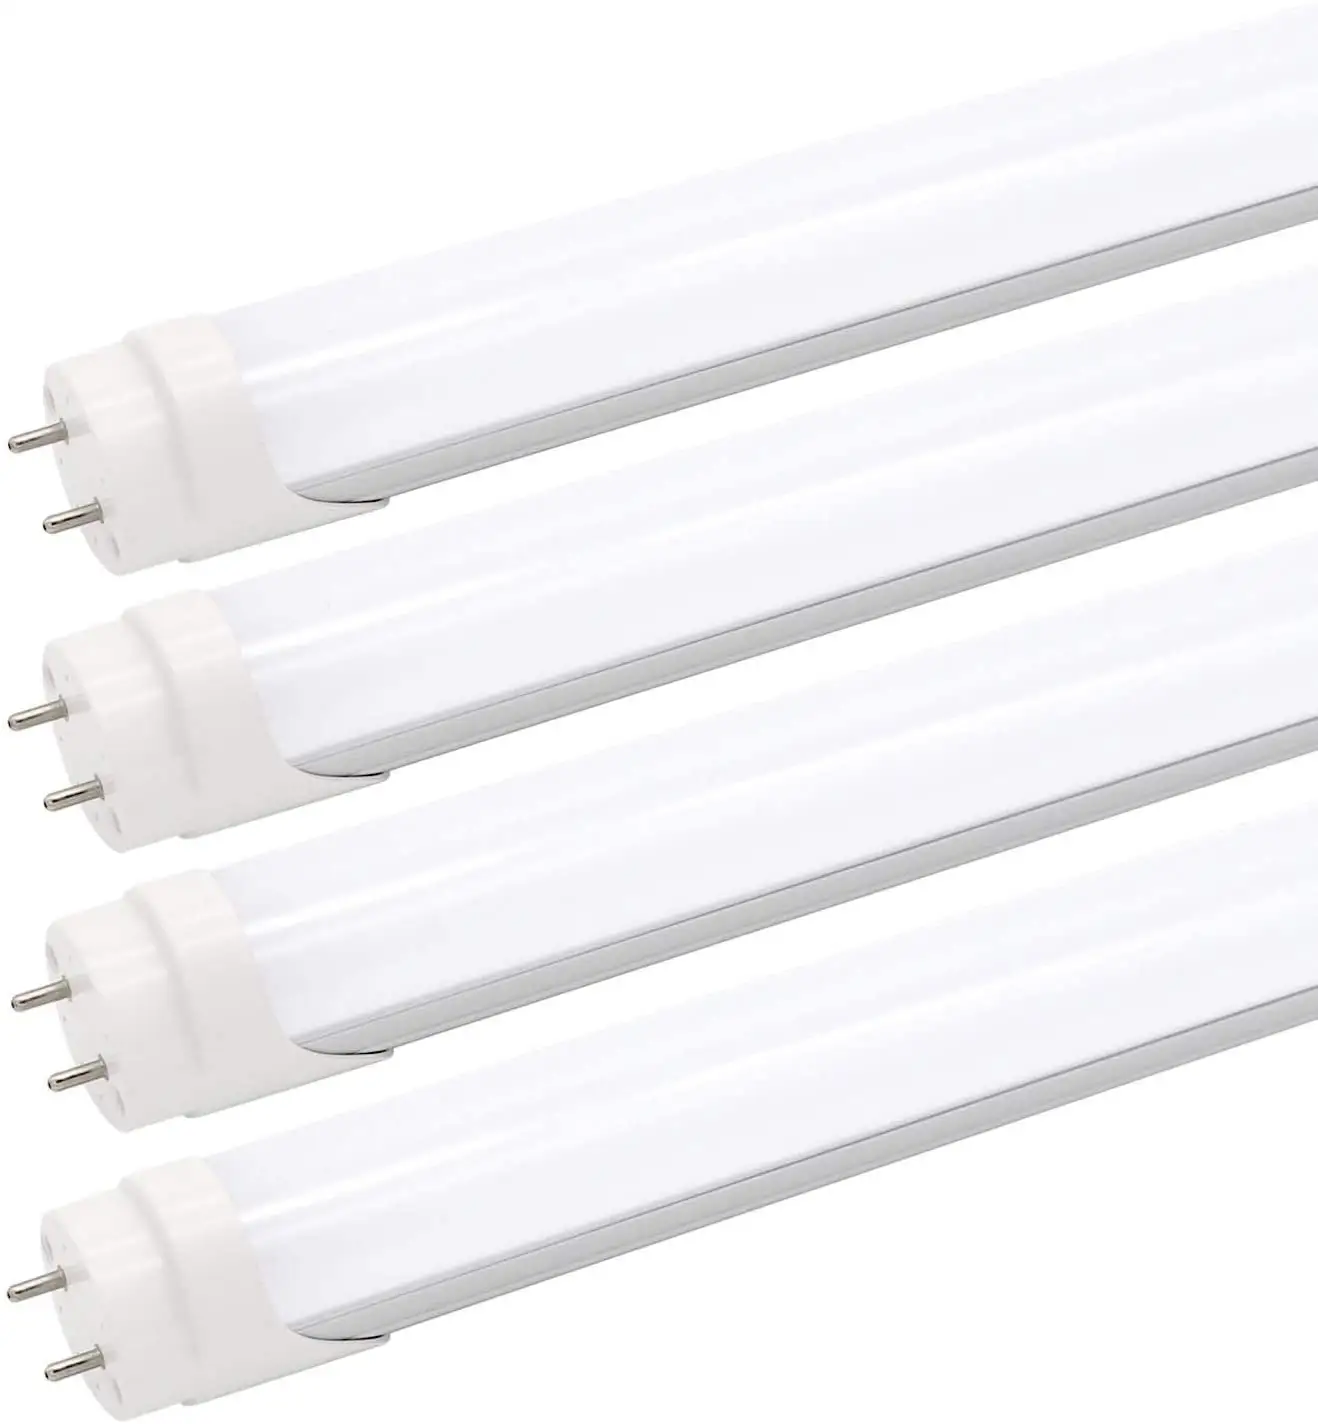 China Supplier High Lumen Aluminum Body G13 2FT 4FT 600mm 1200mm 9W 18W T8 Led Tube Light with 5 Years Warranty